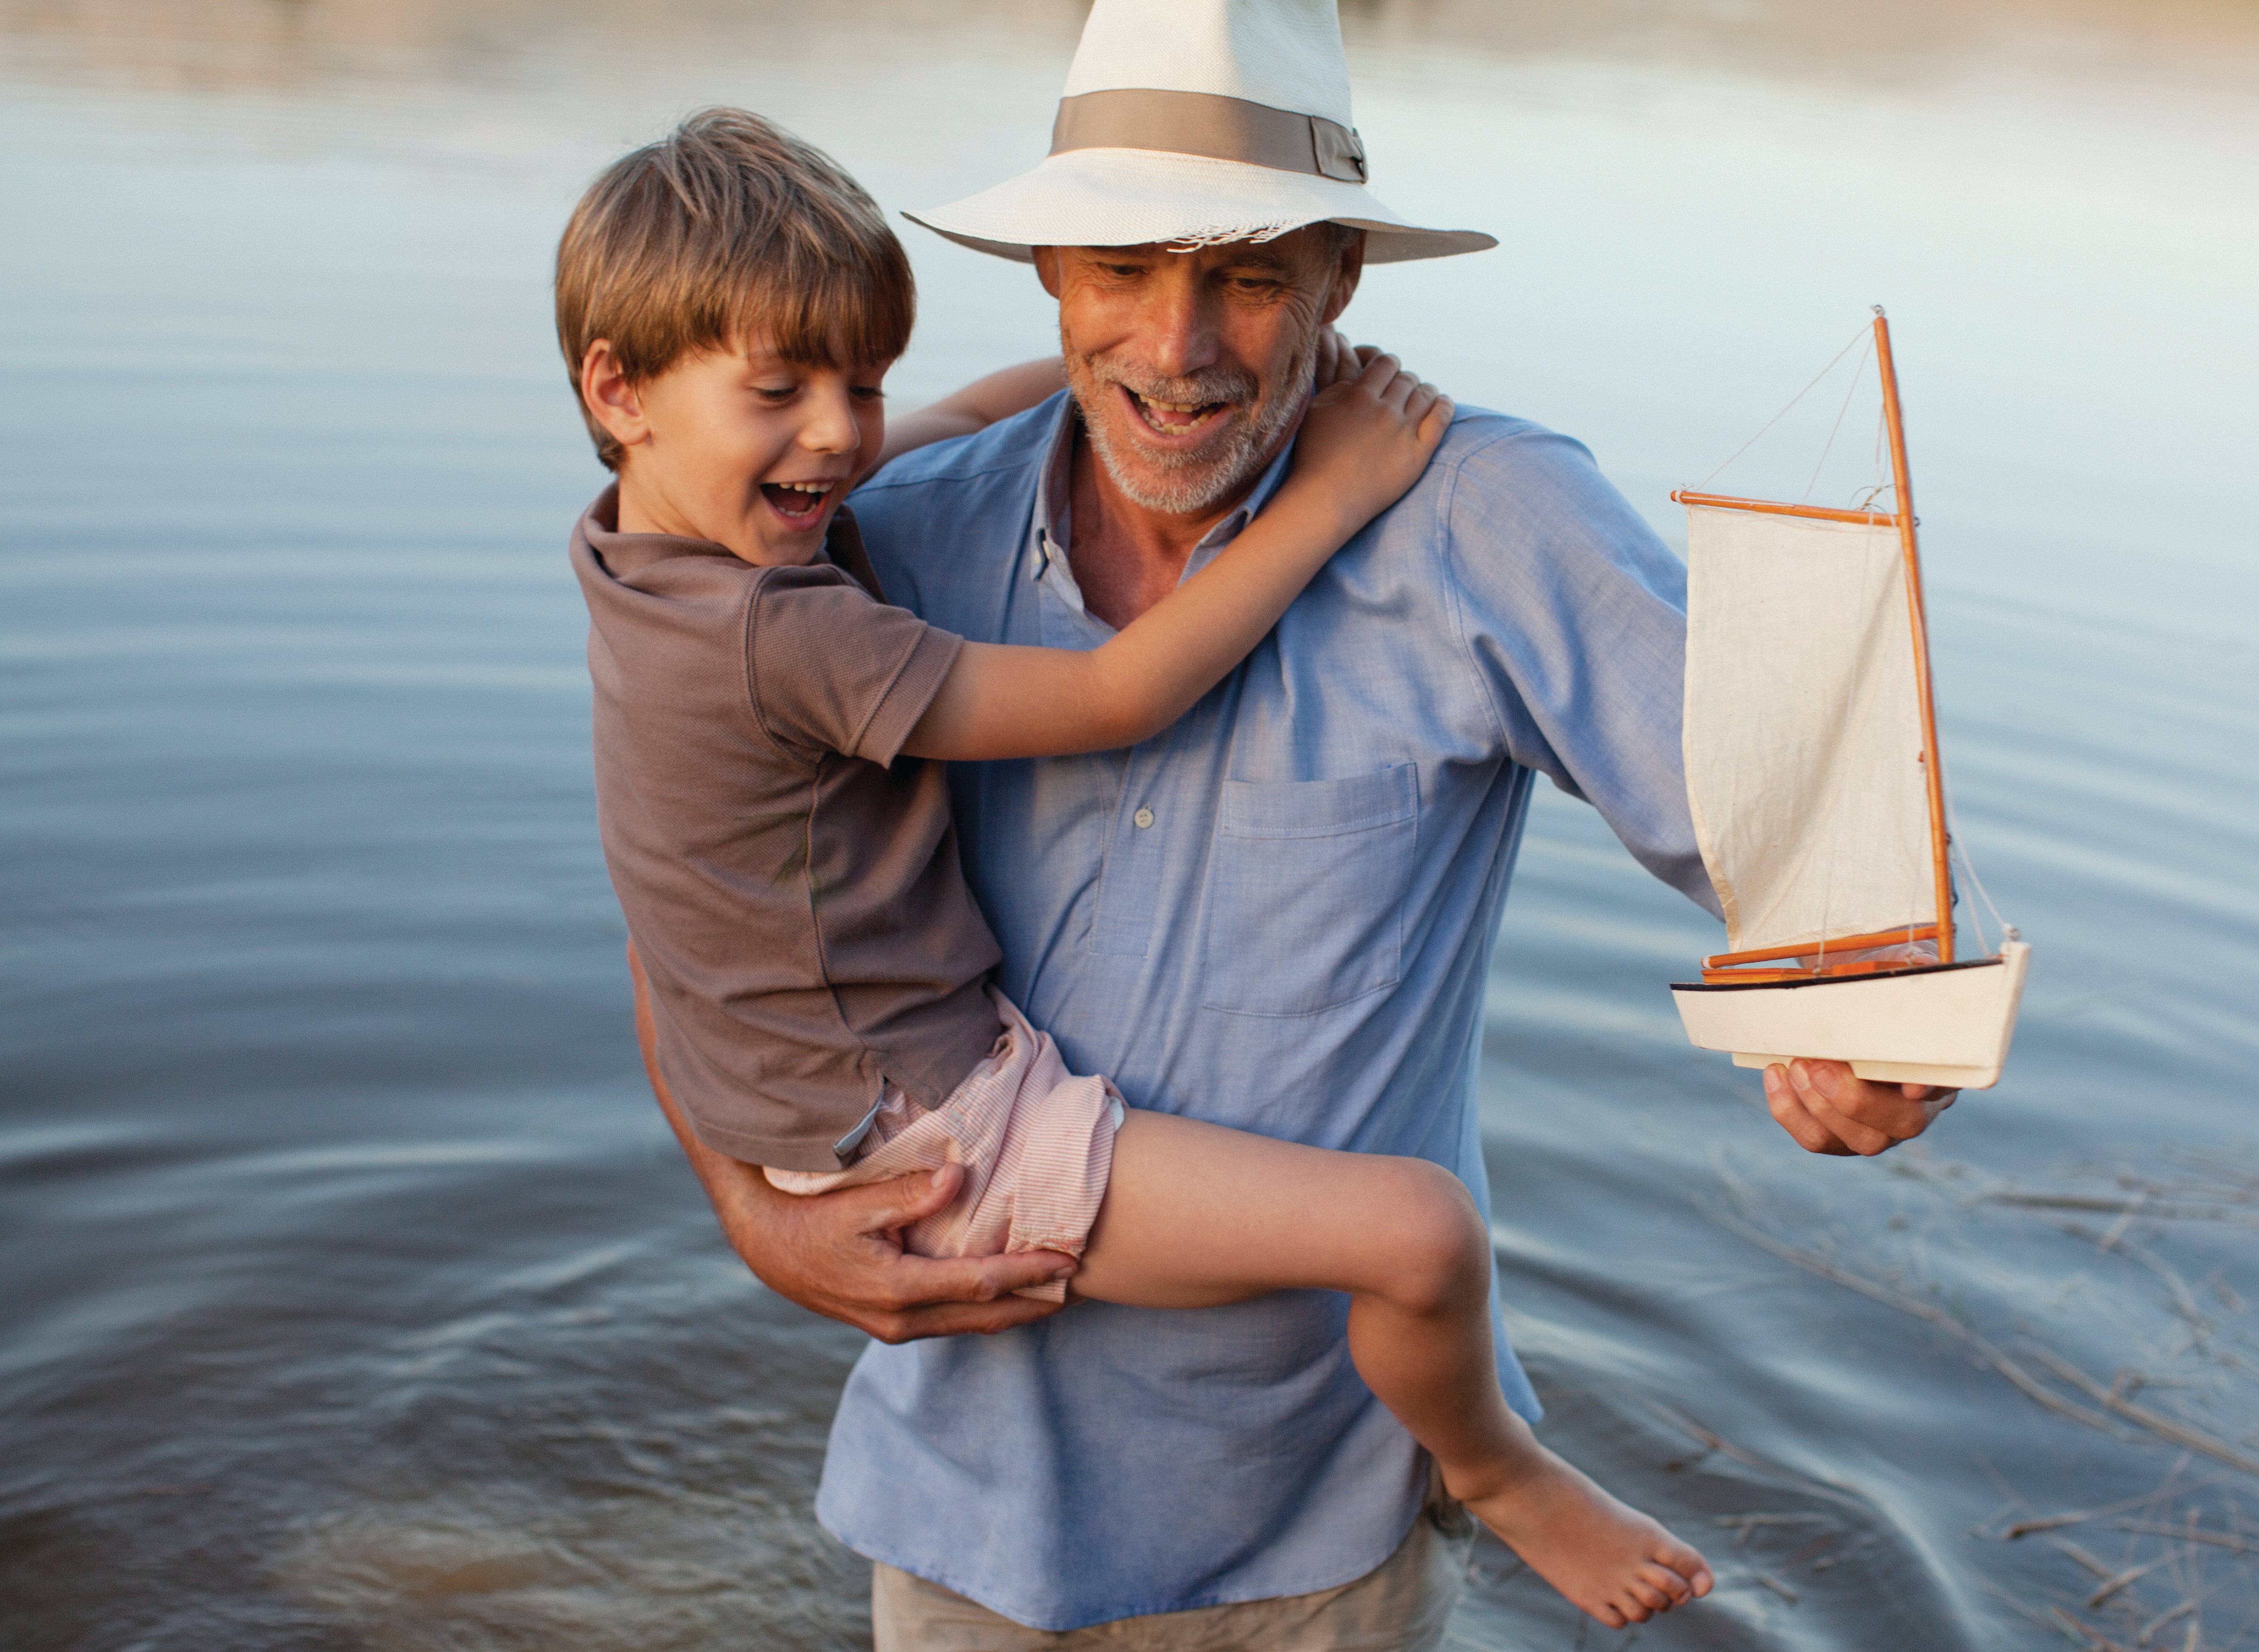 Smiling grandfather and grandson with toy sailboat wading in lake